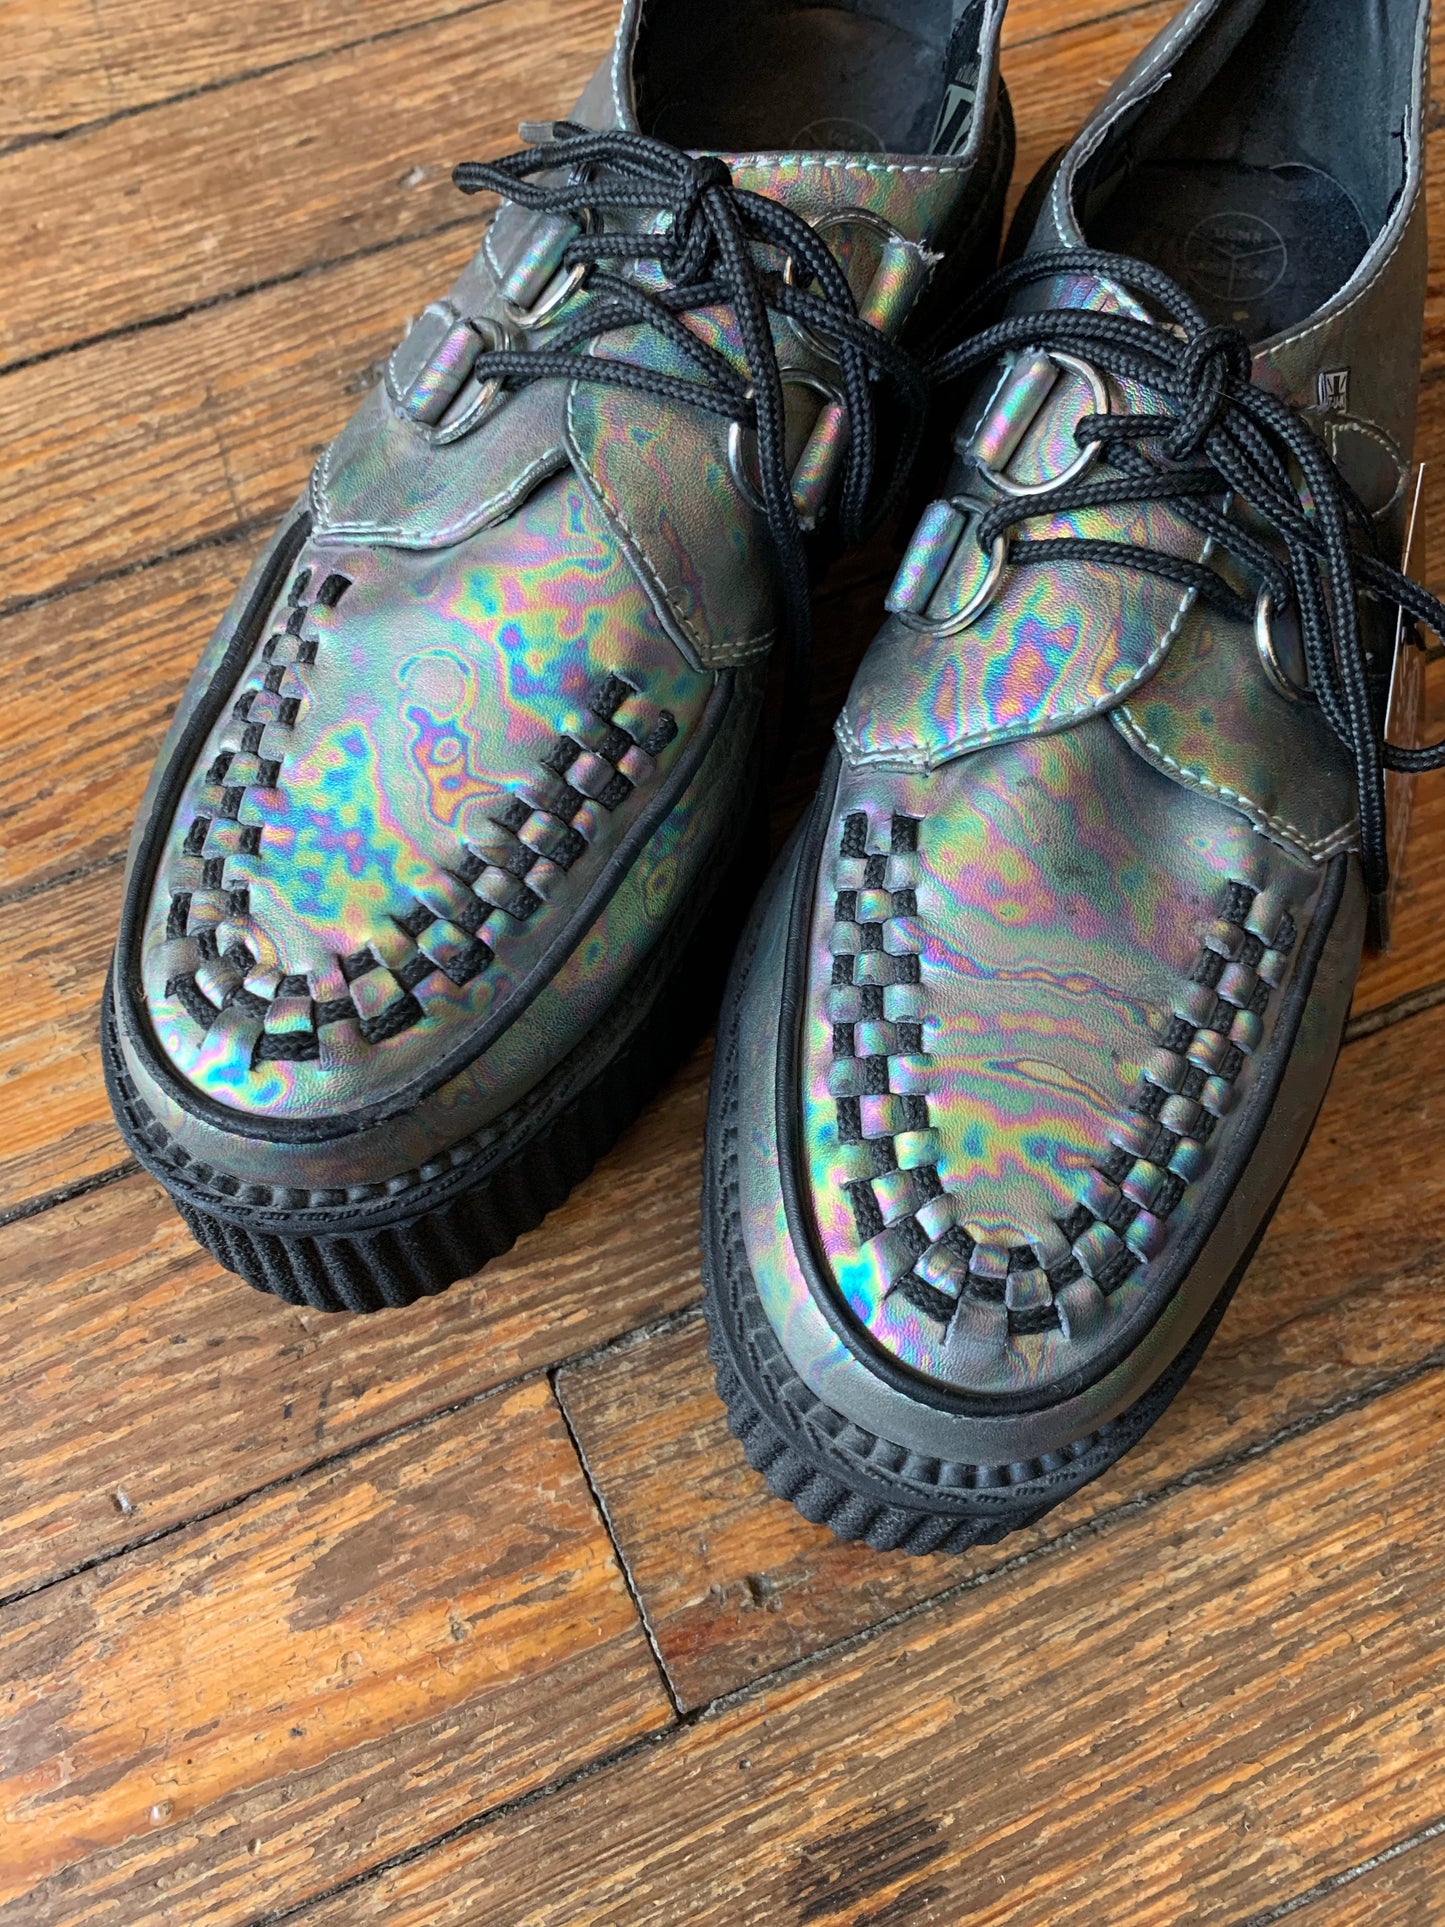 TUK Oil Slick Holographic Creepers